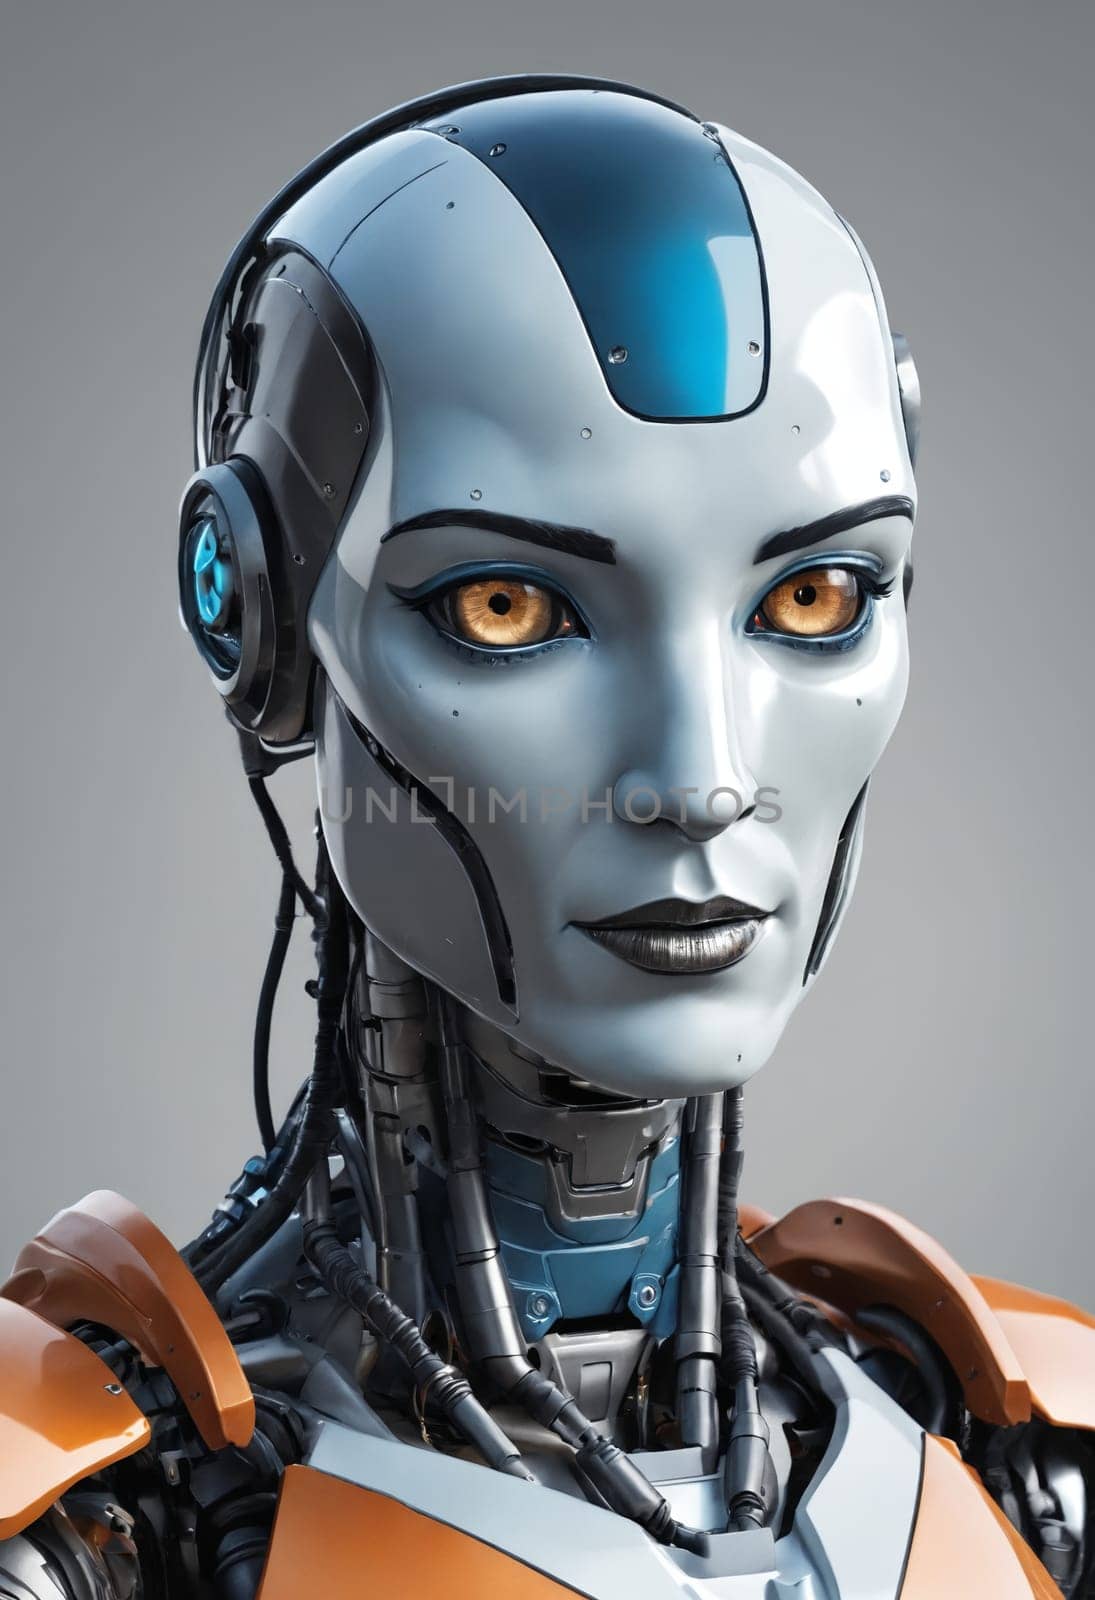 Humanoid robot designed with complex wirings and pneumatics, epitomizing modern mechanical prowess.